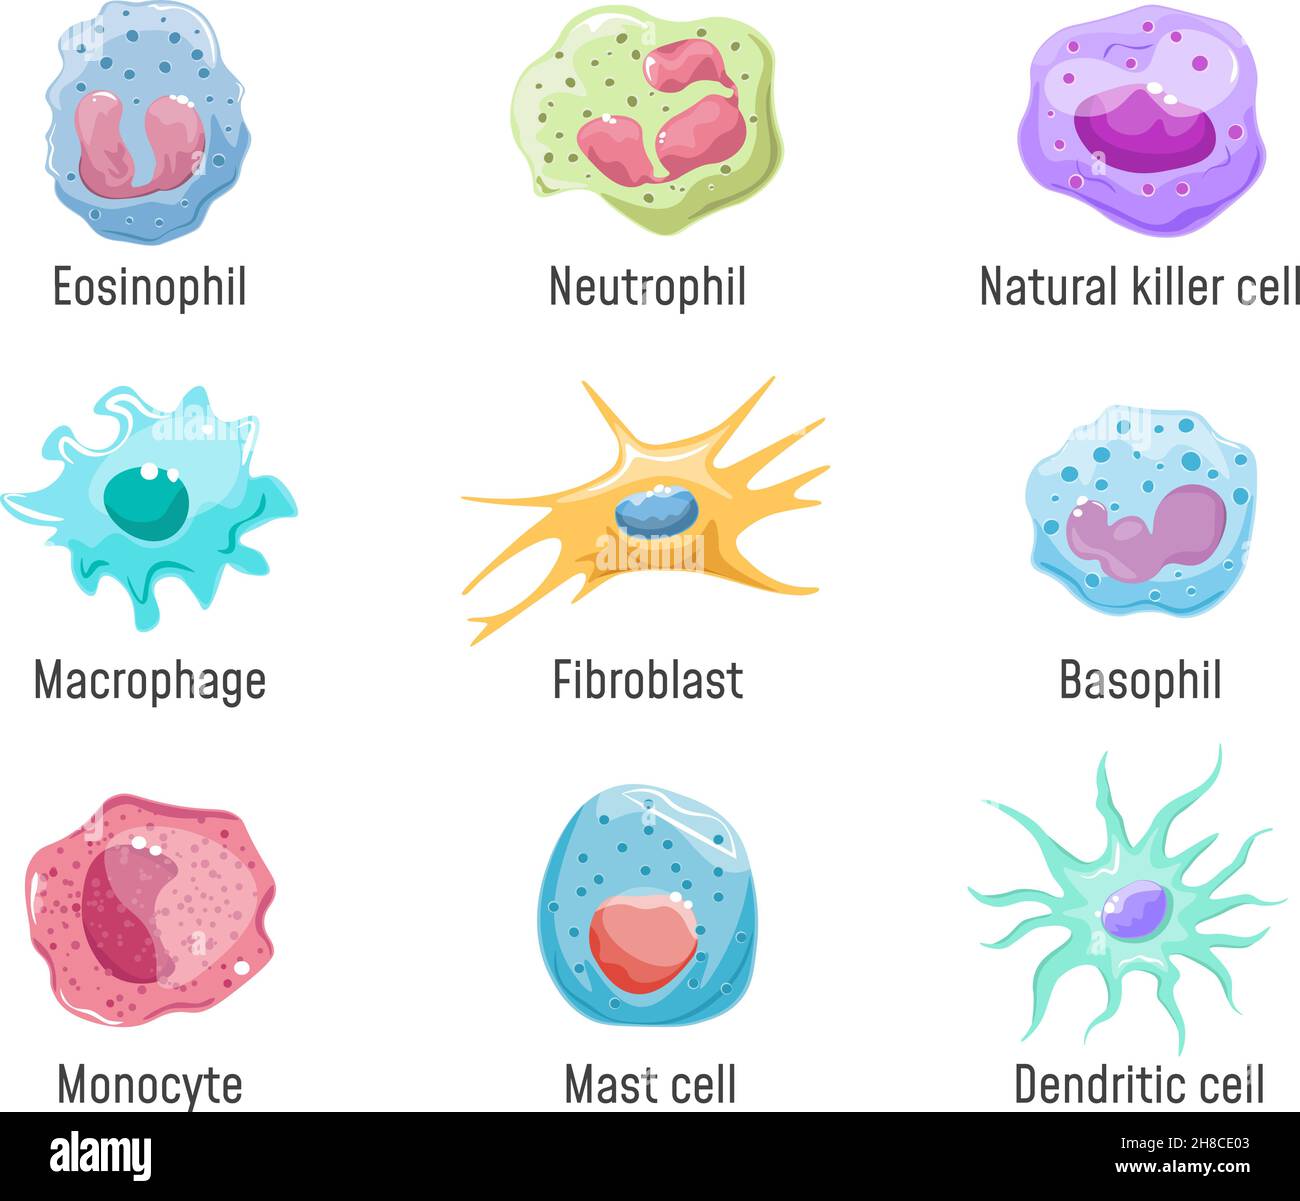 An Illustration Of A Basophil Neutrophil And Eosinophil